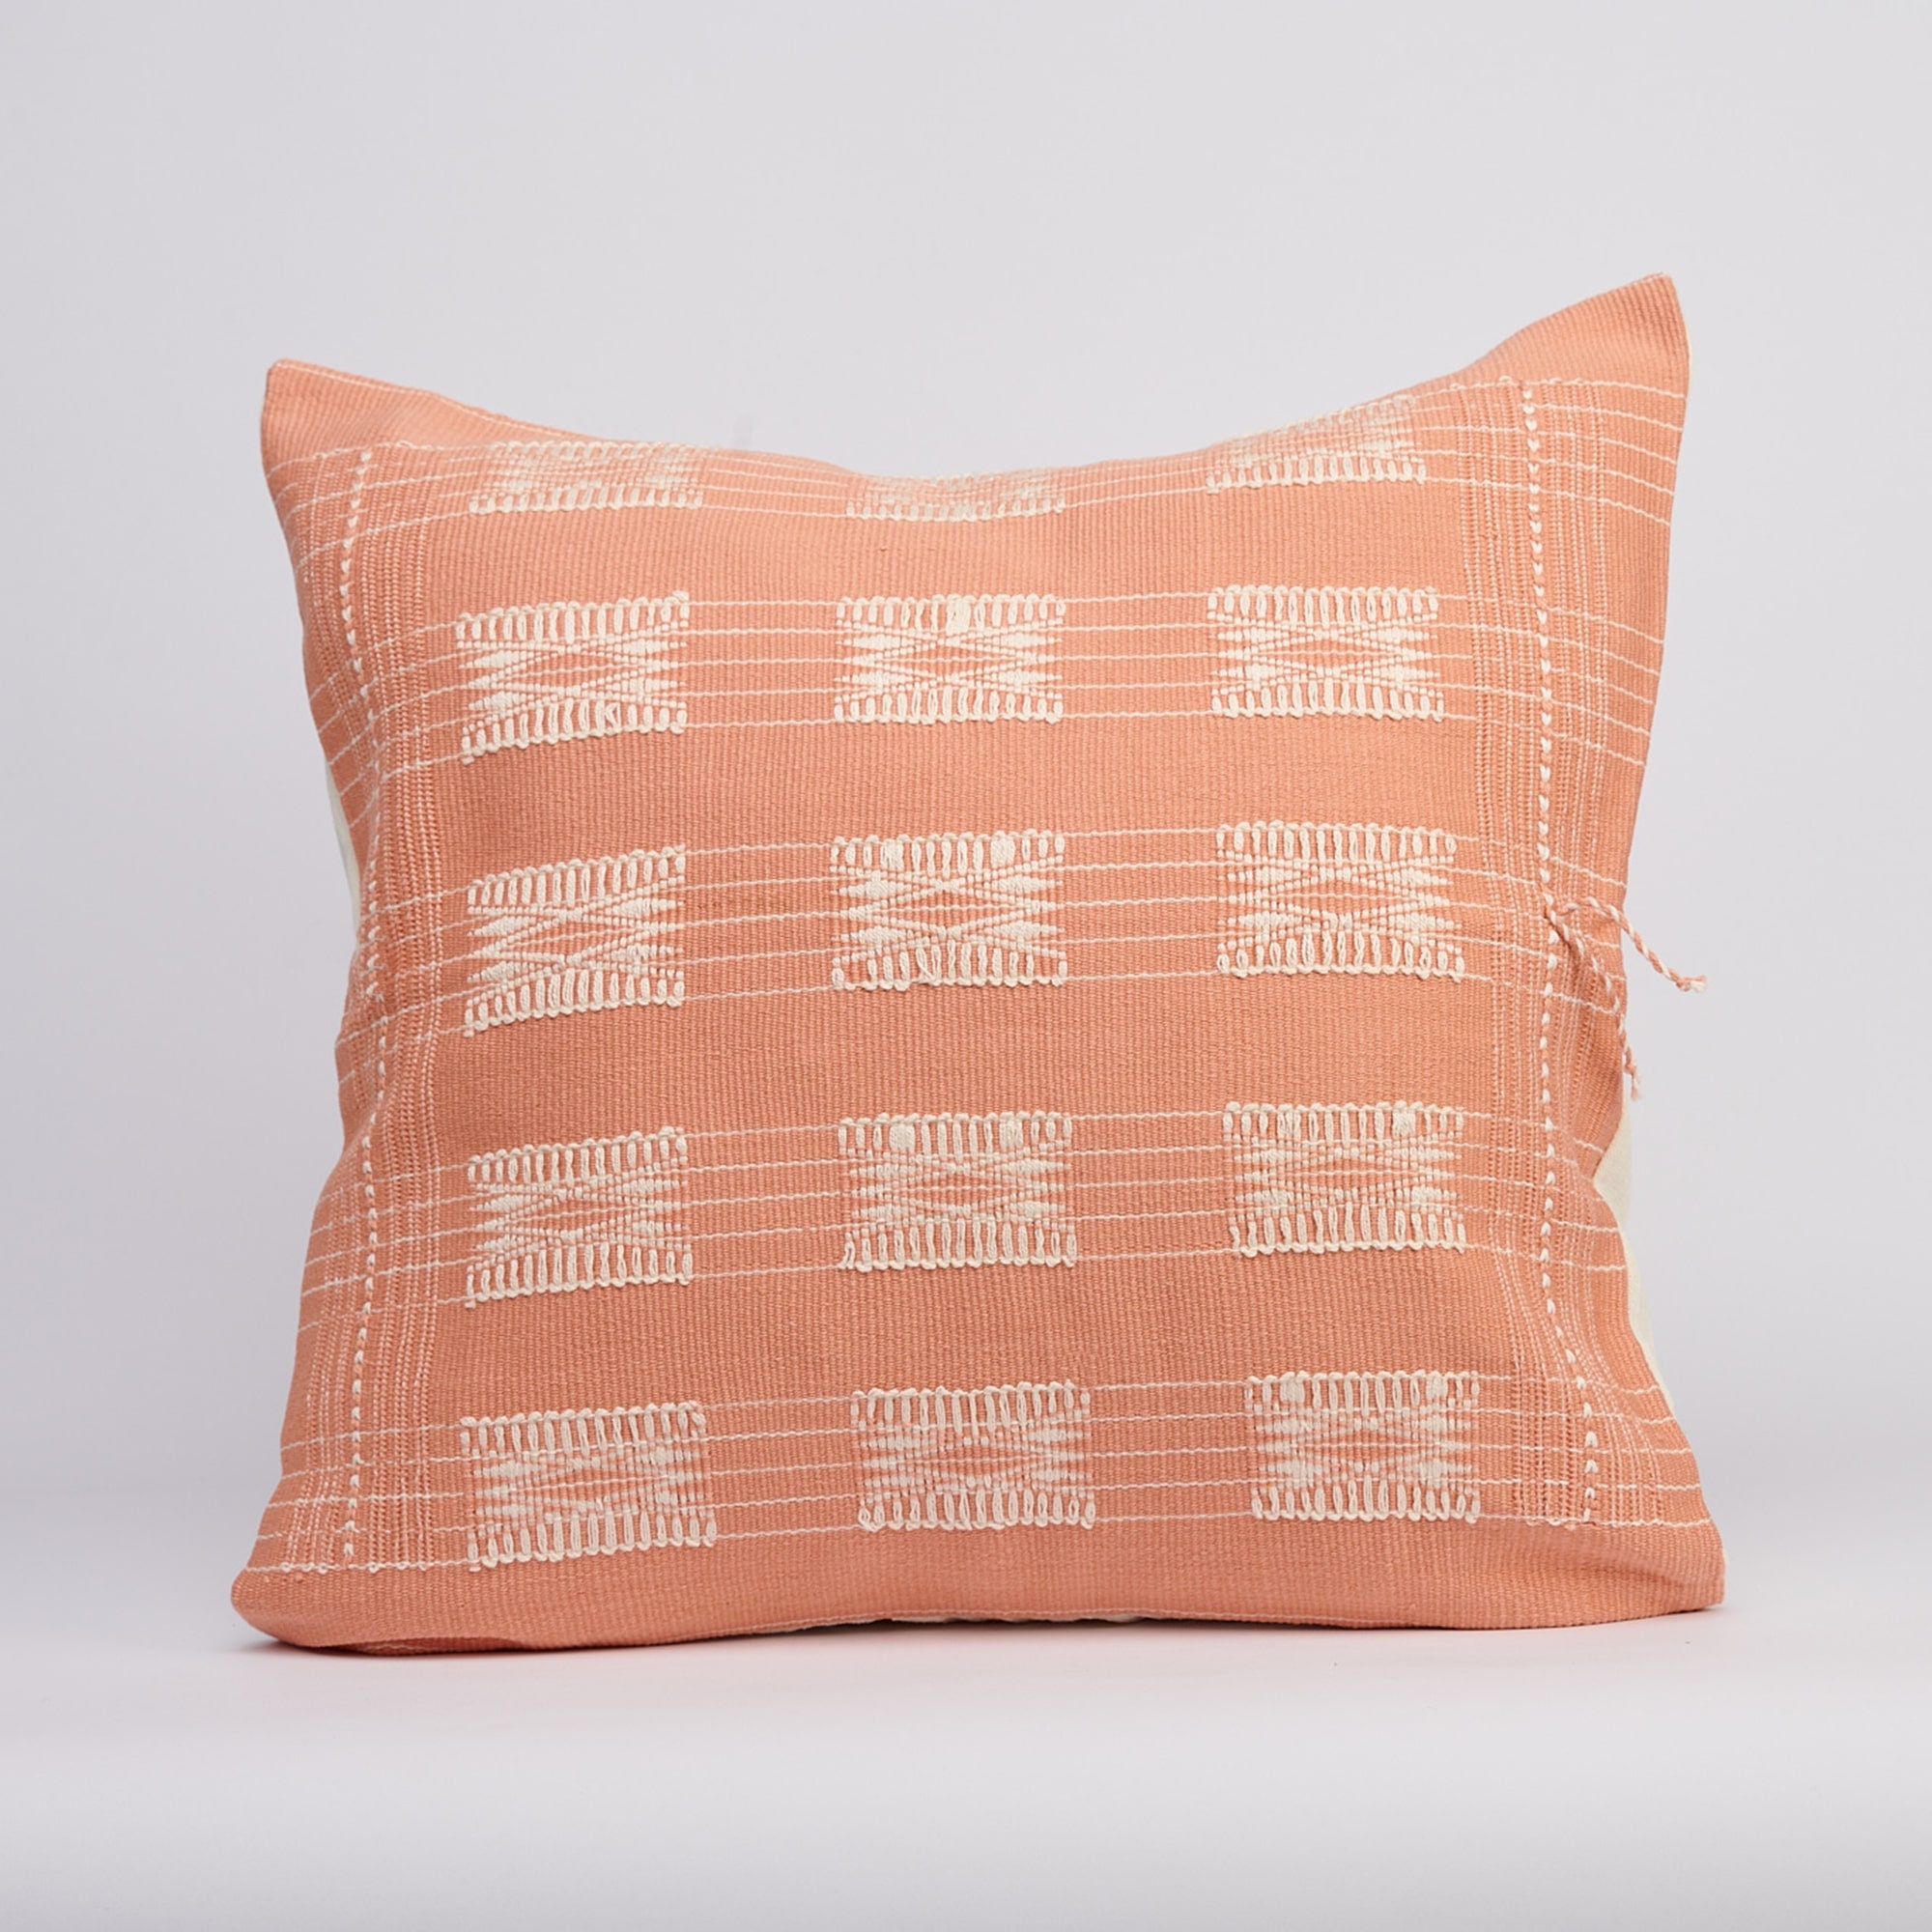 Ticking pillow piece pillow filling 45 x 45 cm white also suitable for  allergy sufferers